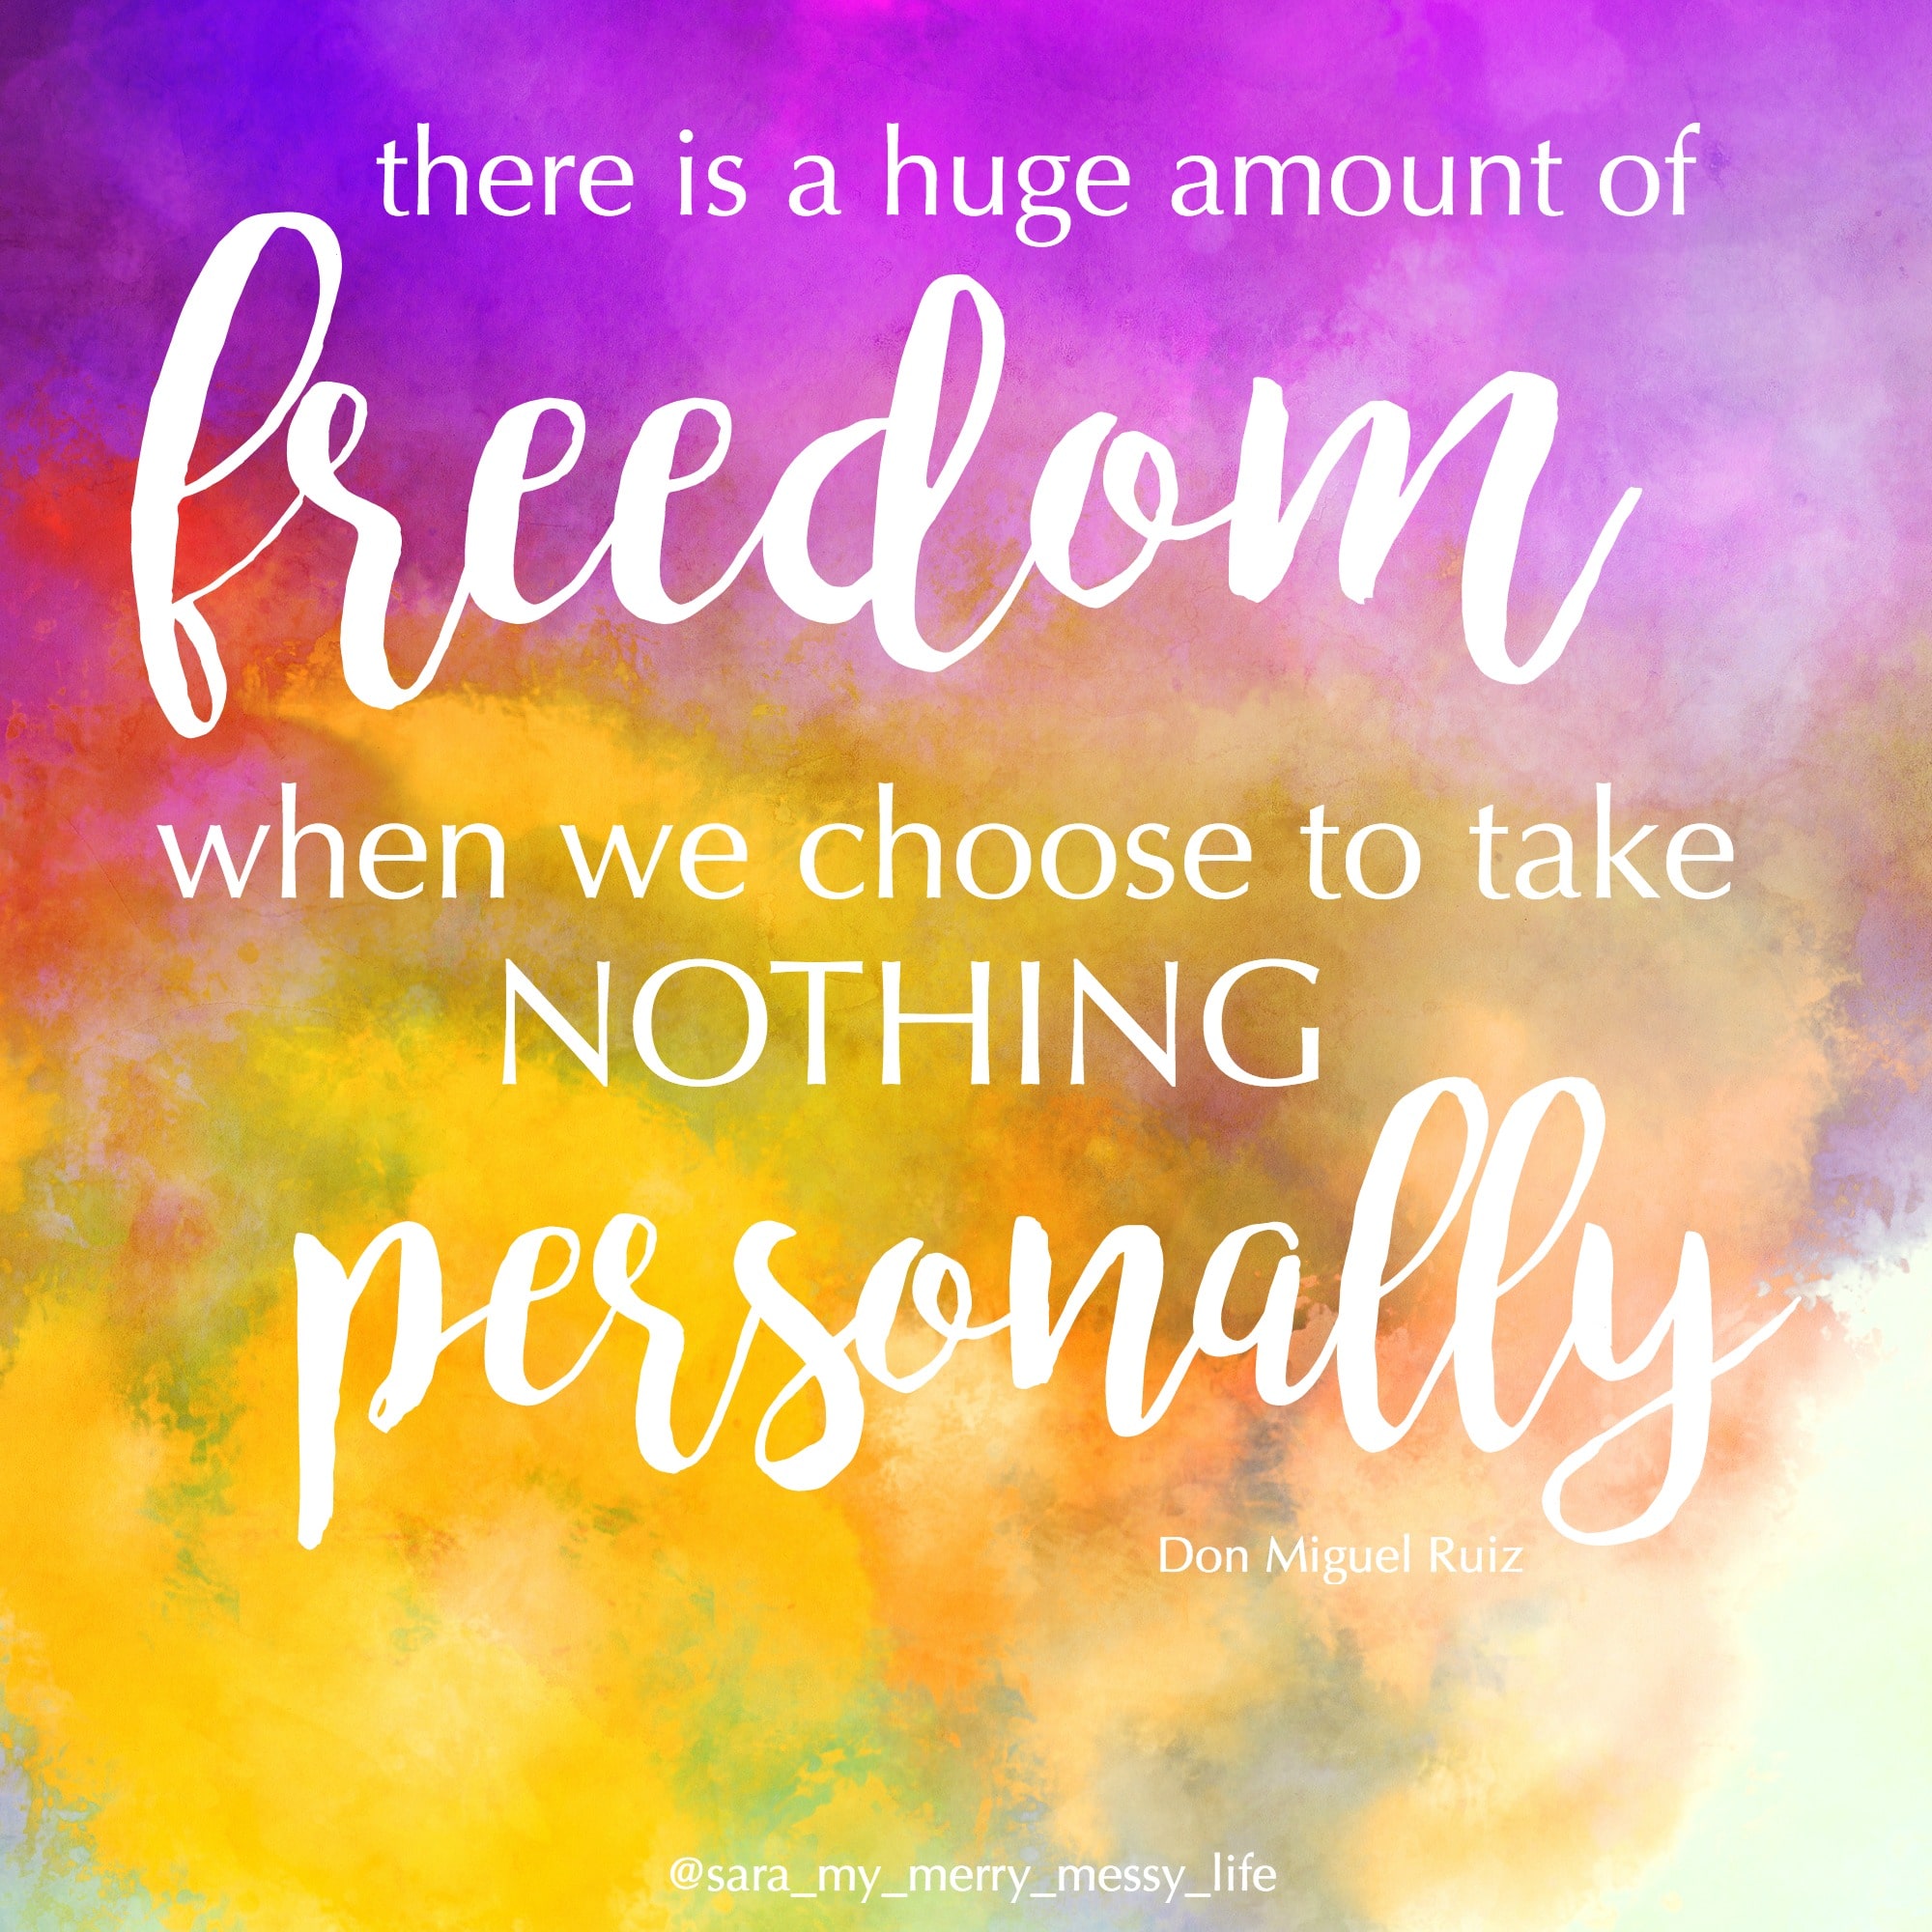 There is a huge amount of freedom when we choose to take nothing personally. - Don Miguel Ruiz